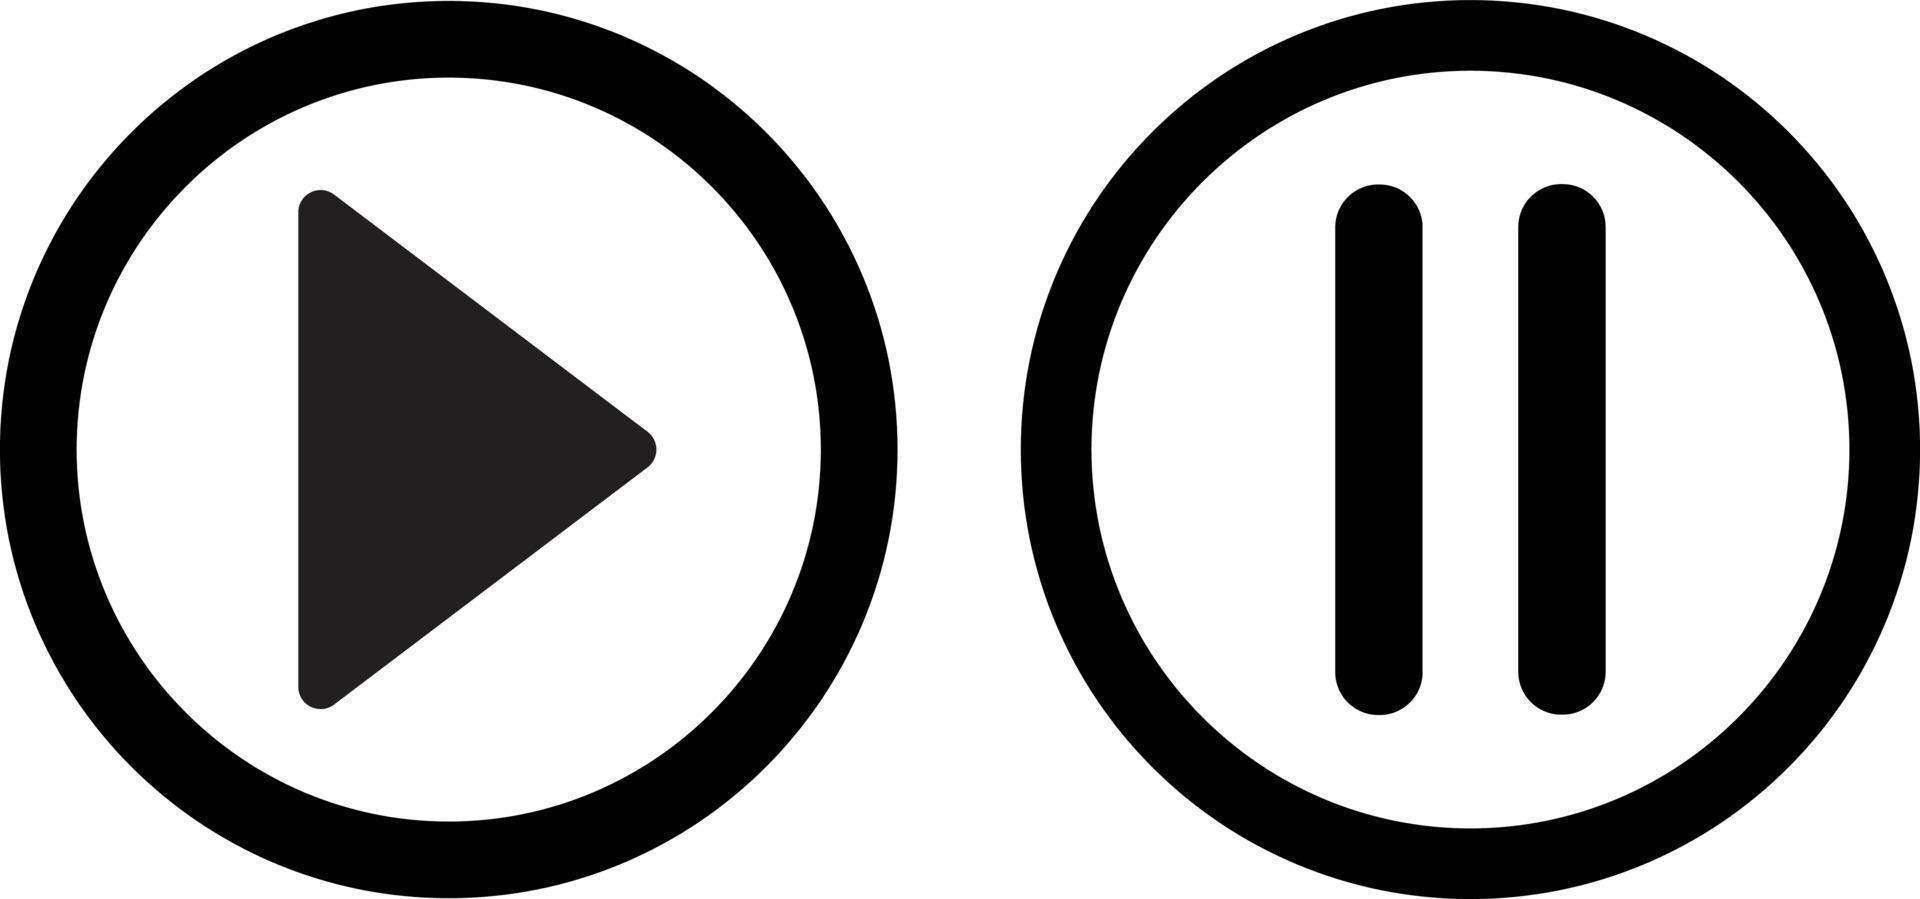 Play and Pause button icon. Media player control icon vector